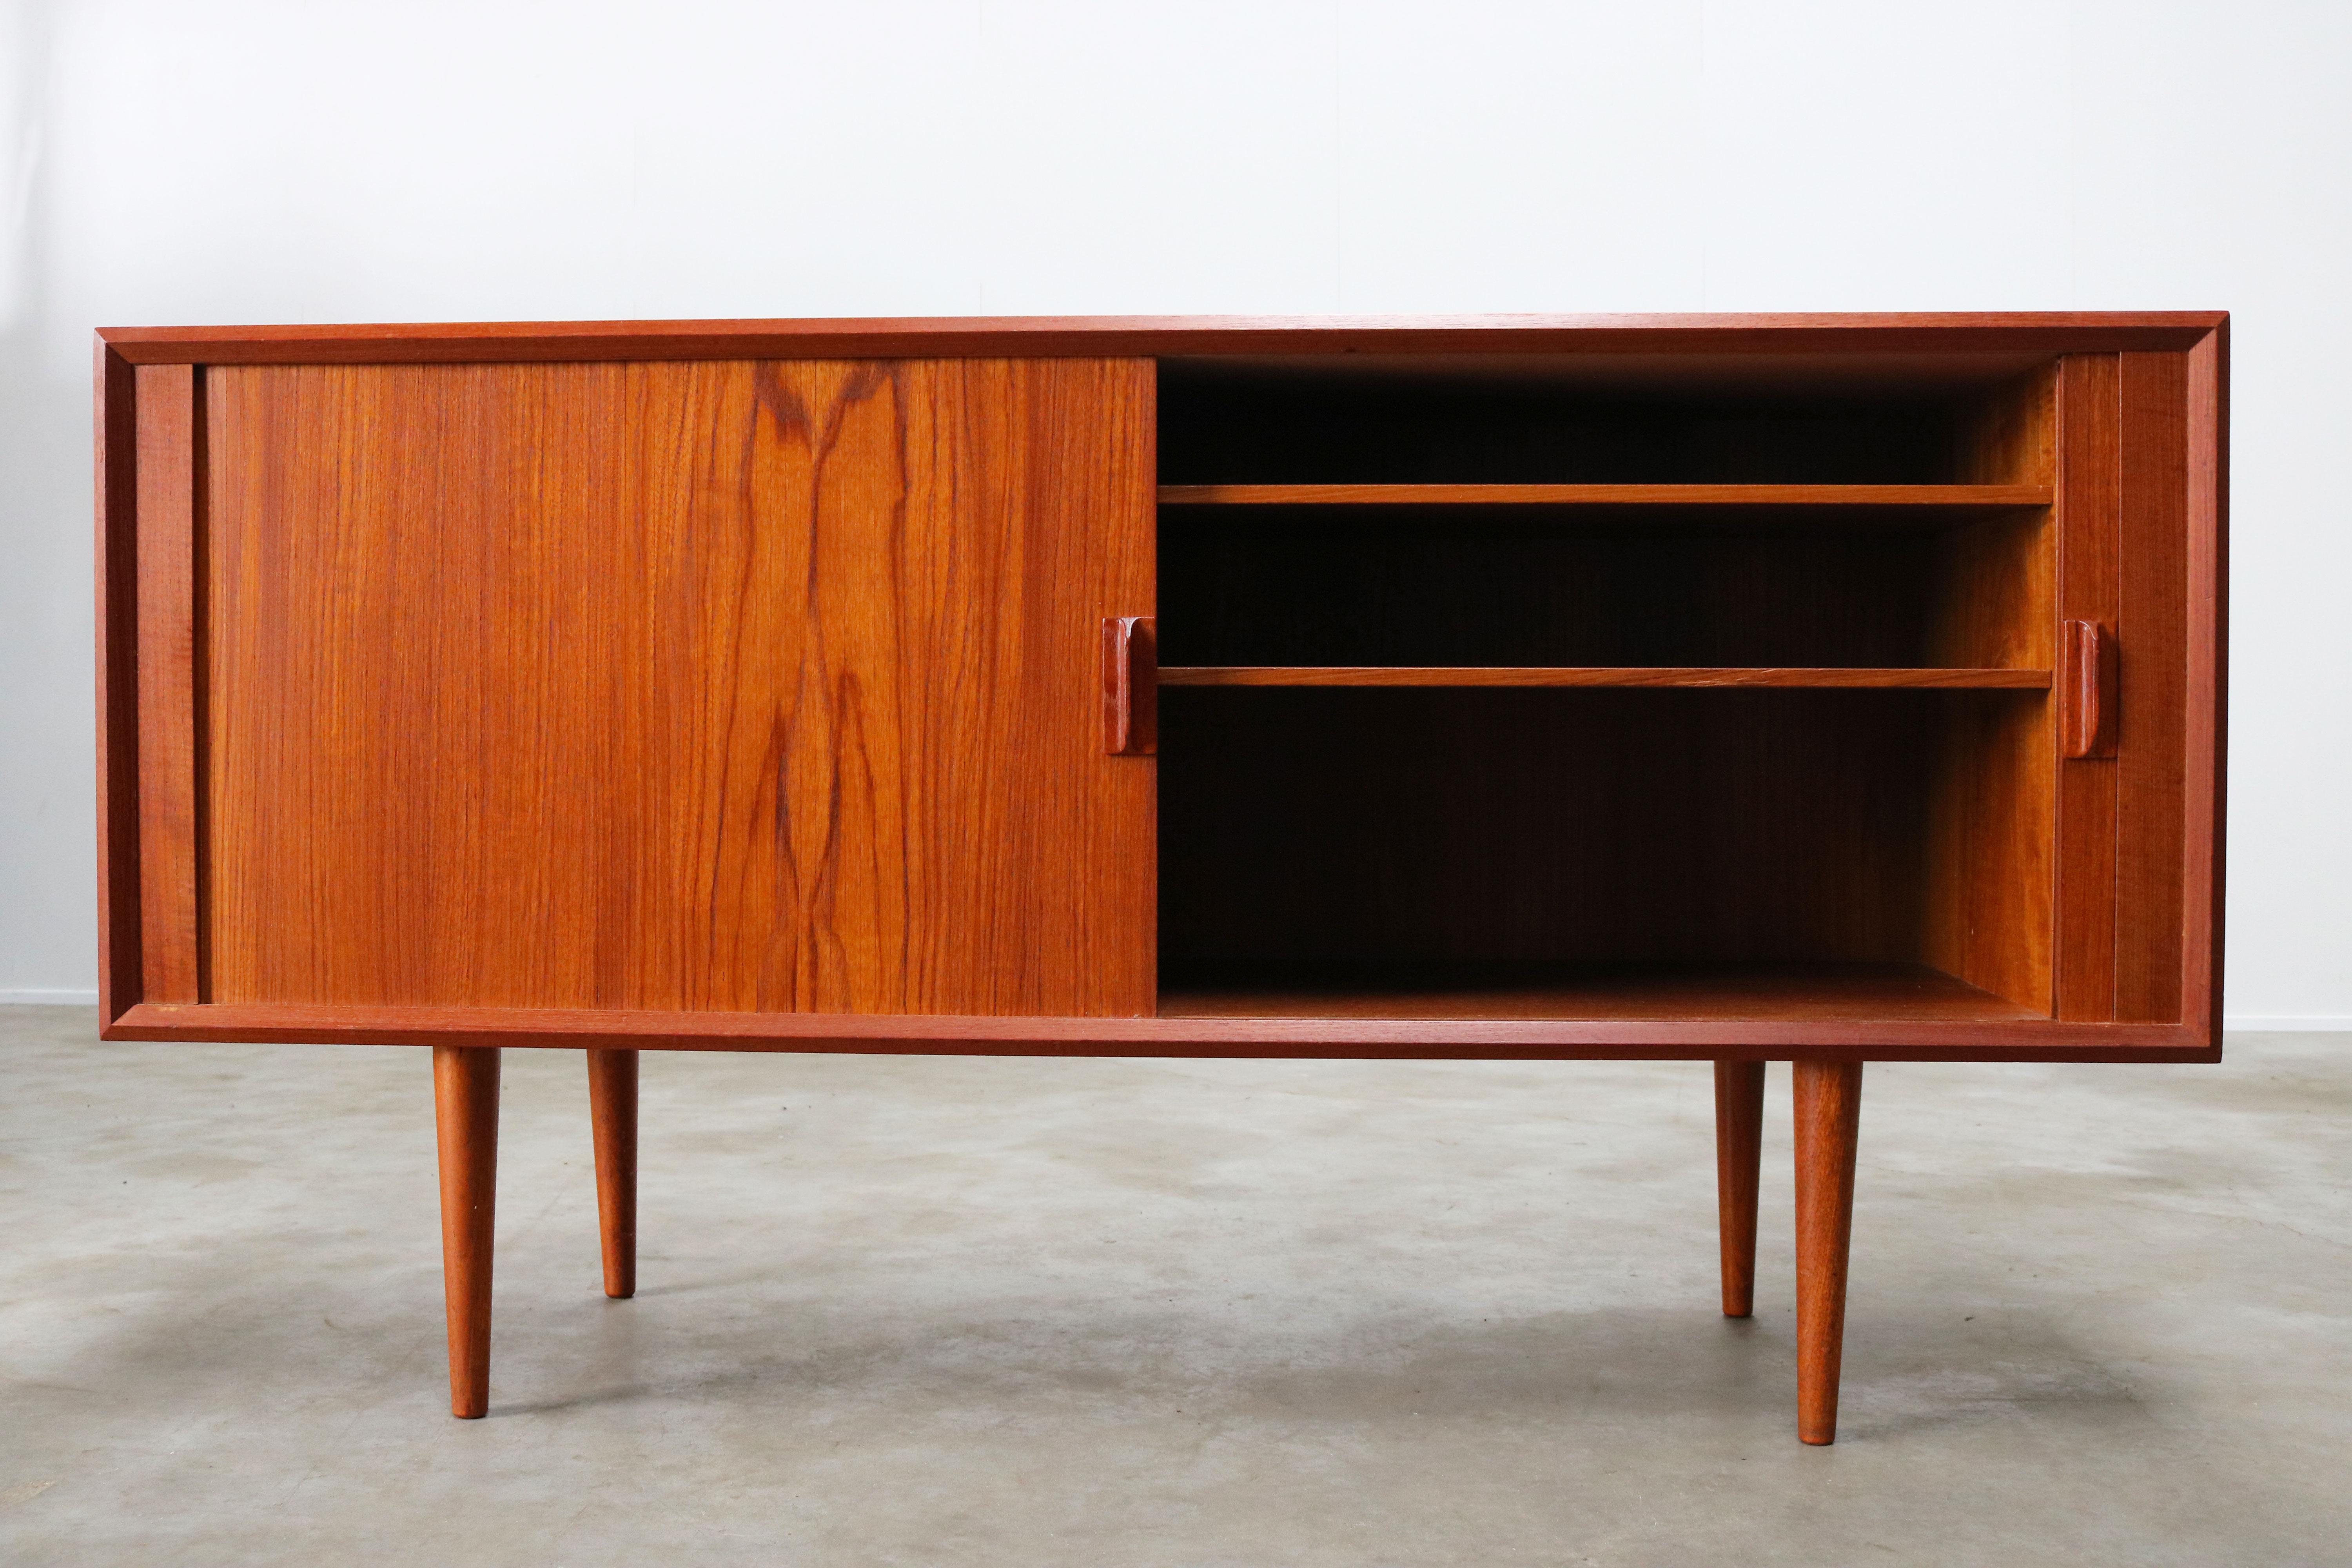 Mid-20th Century Small Rare Danish Sideboard / Credenza by Svend Aage Madsen for Faarup 1950 Teak